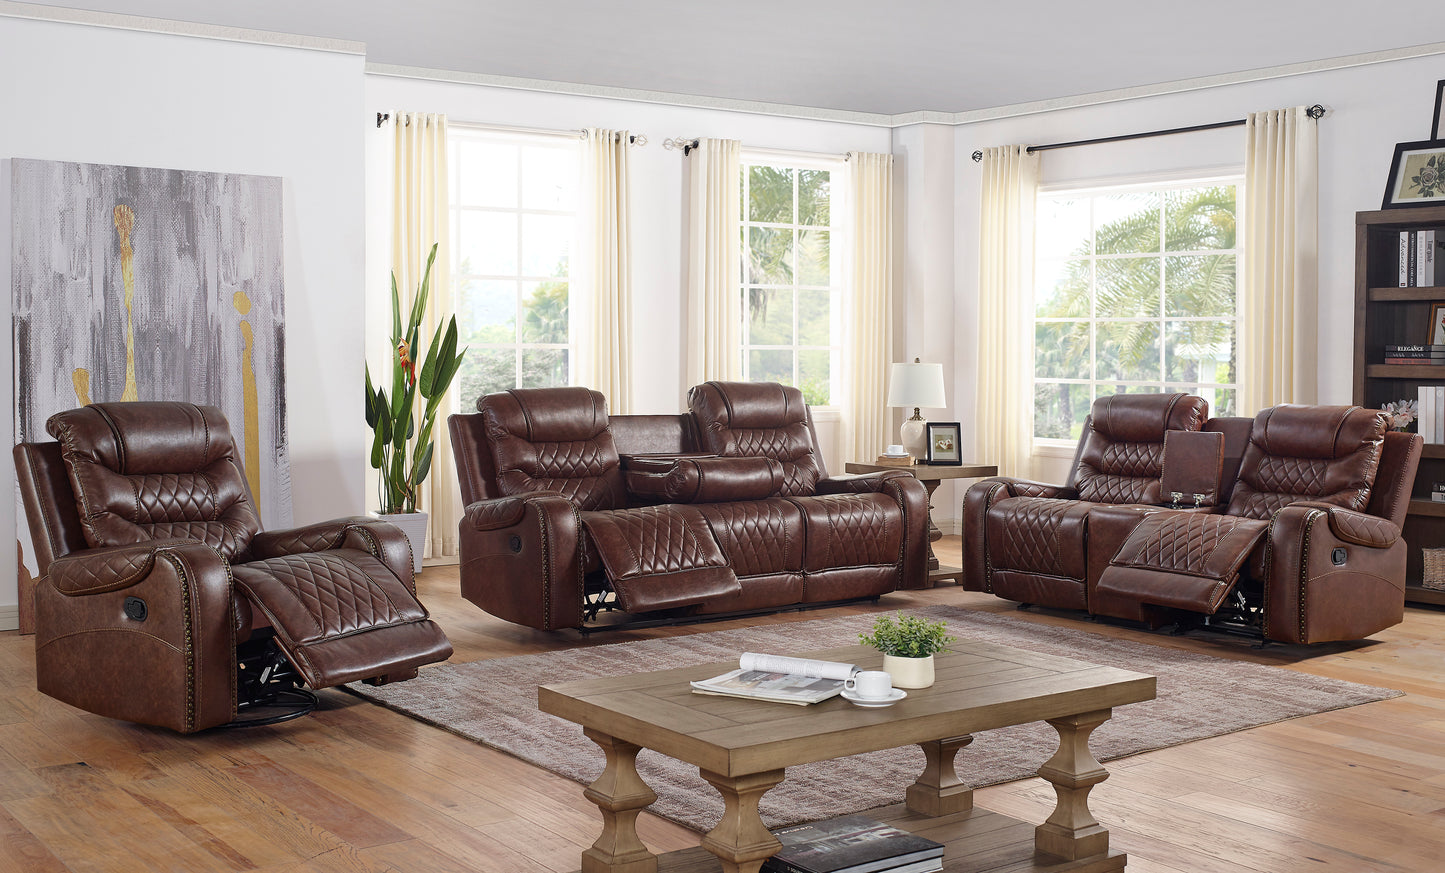 Klens Faux Leather 3-Piece Reclining Living Room Collection with Nailhead Trim, Brown